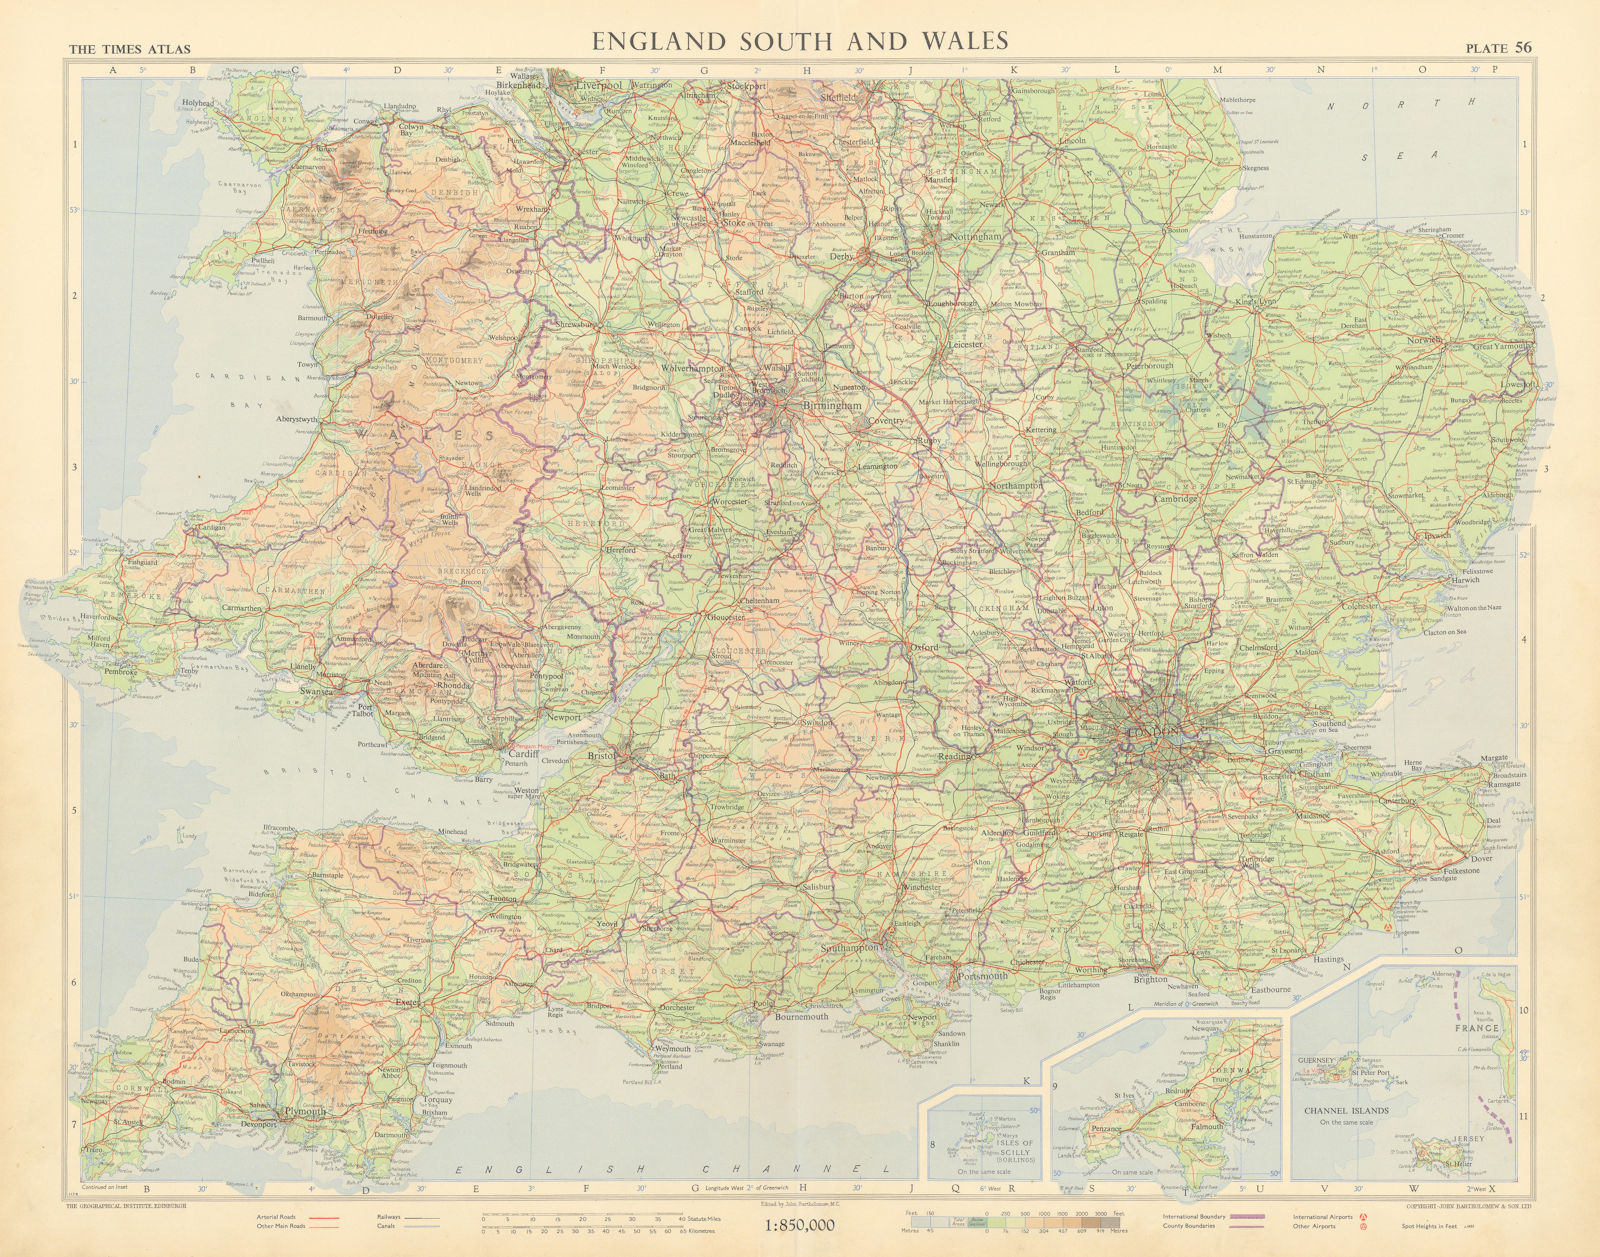 Southern England and Wales. Road network pre motorways. TIMES 1955 old map